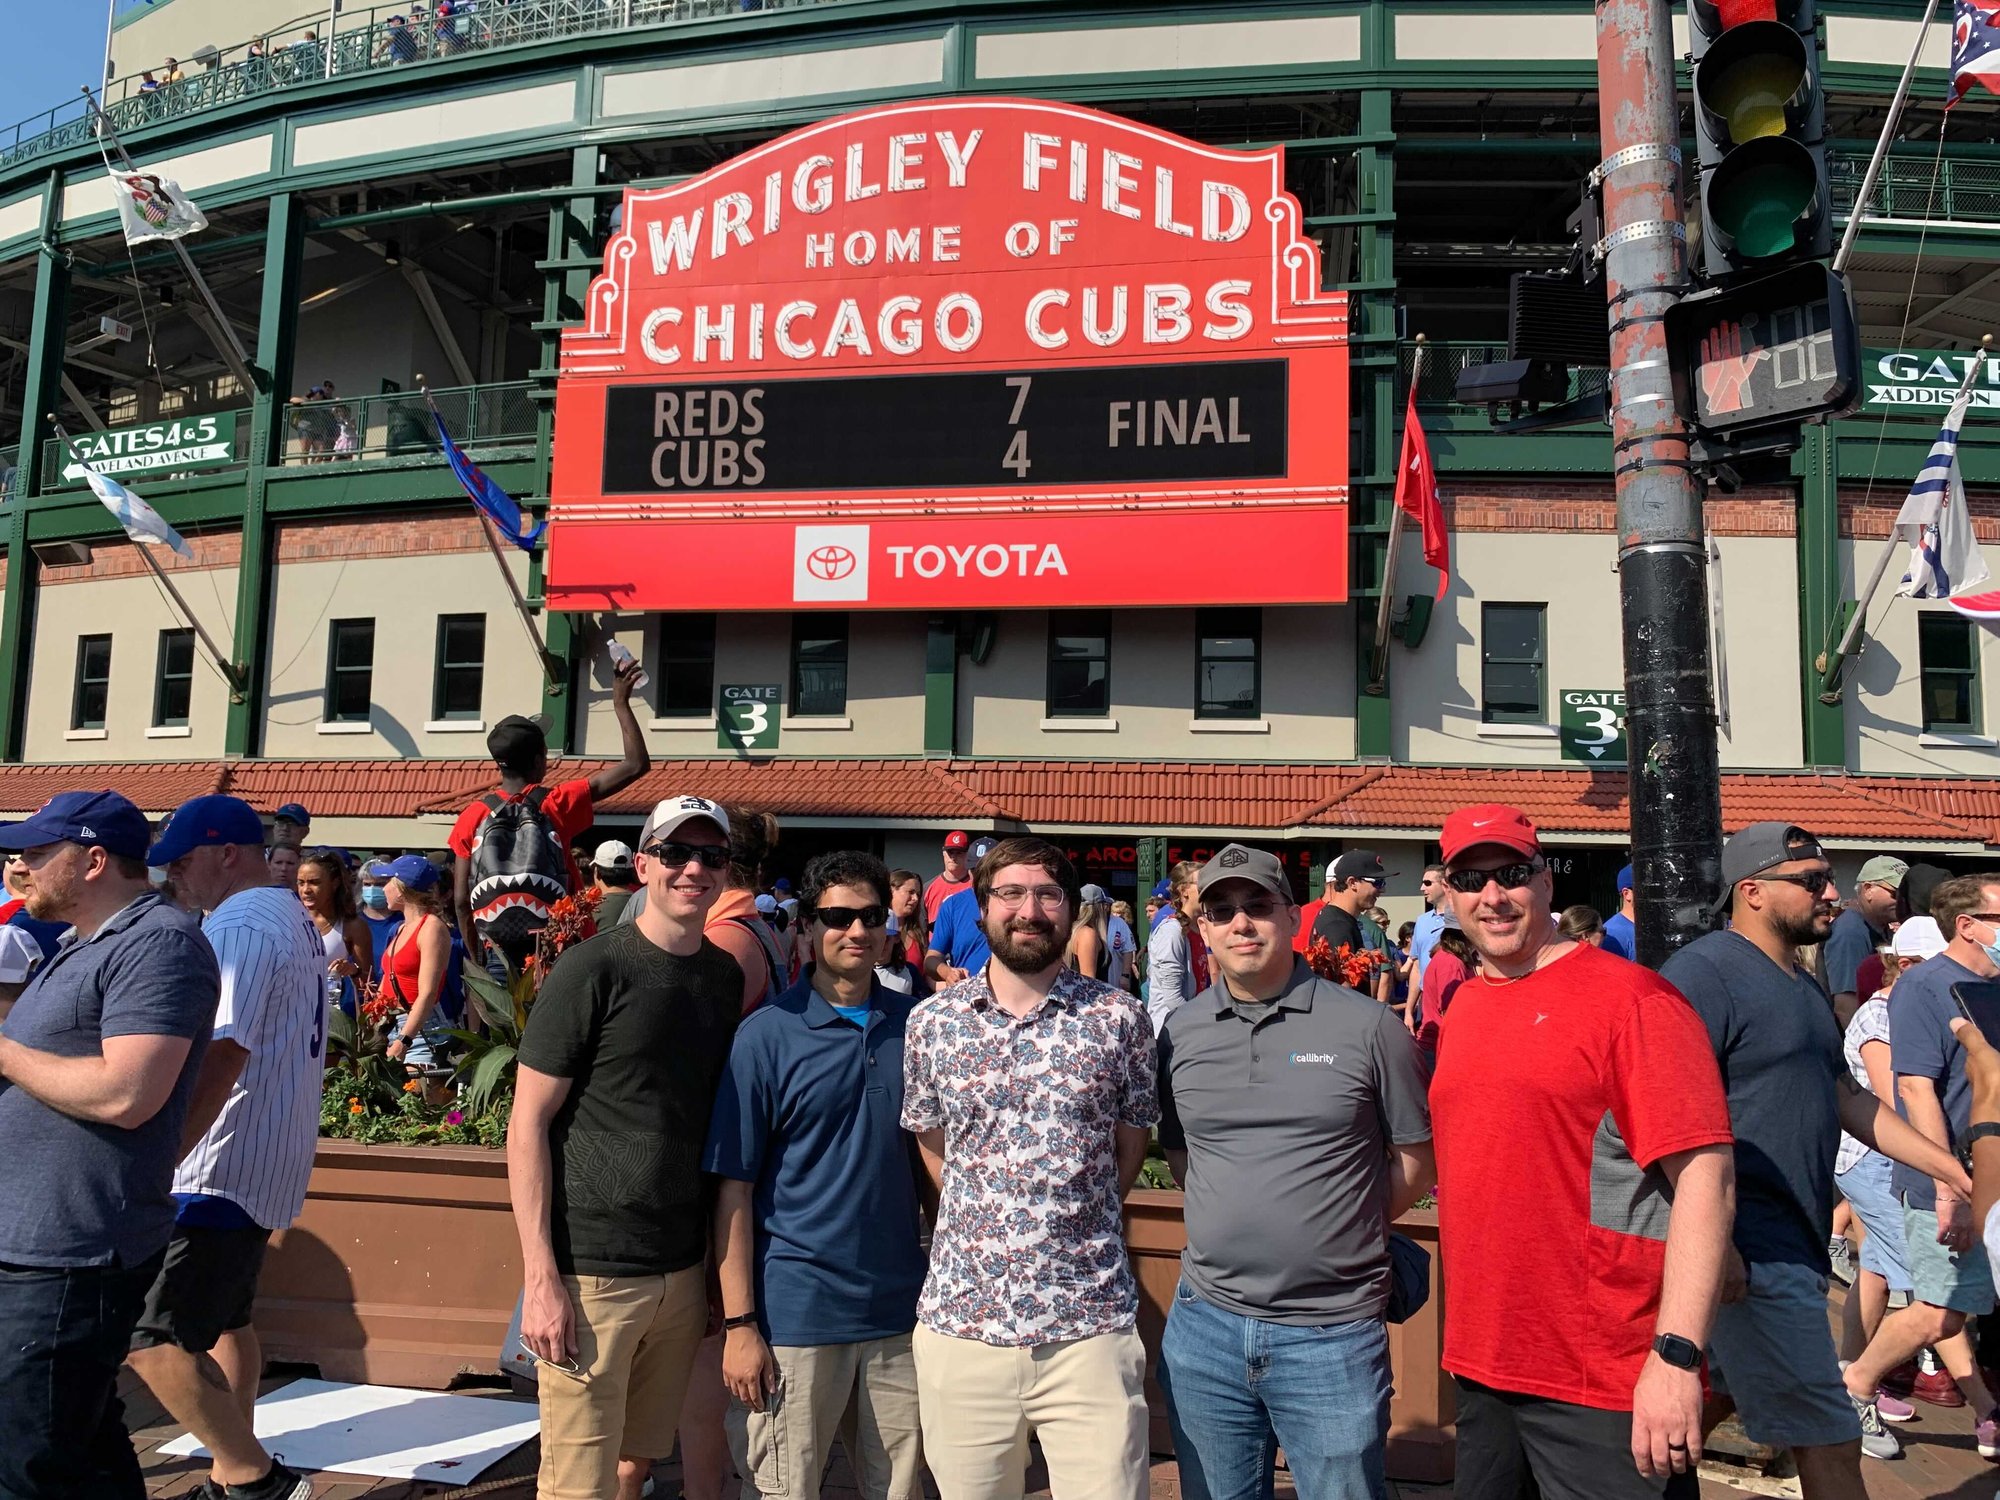 Some of our team members enjoying themselves at Wrigley Field (Home of the Chicago Cubs)